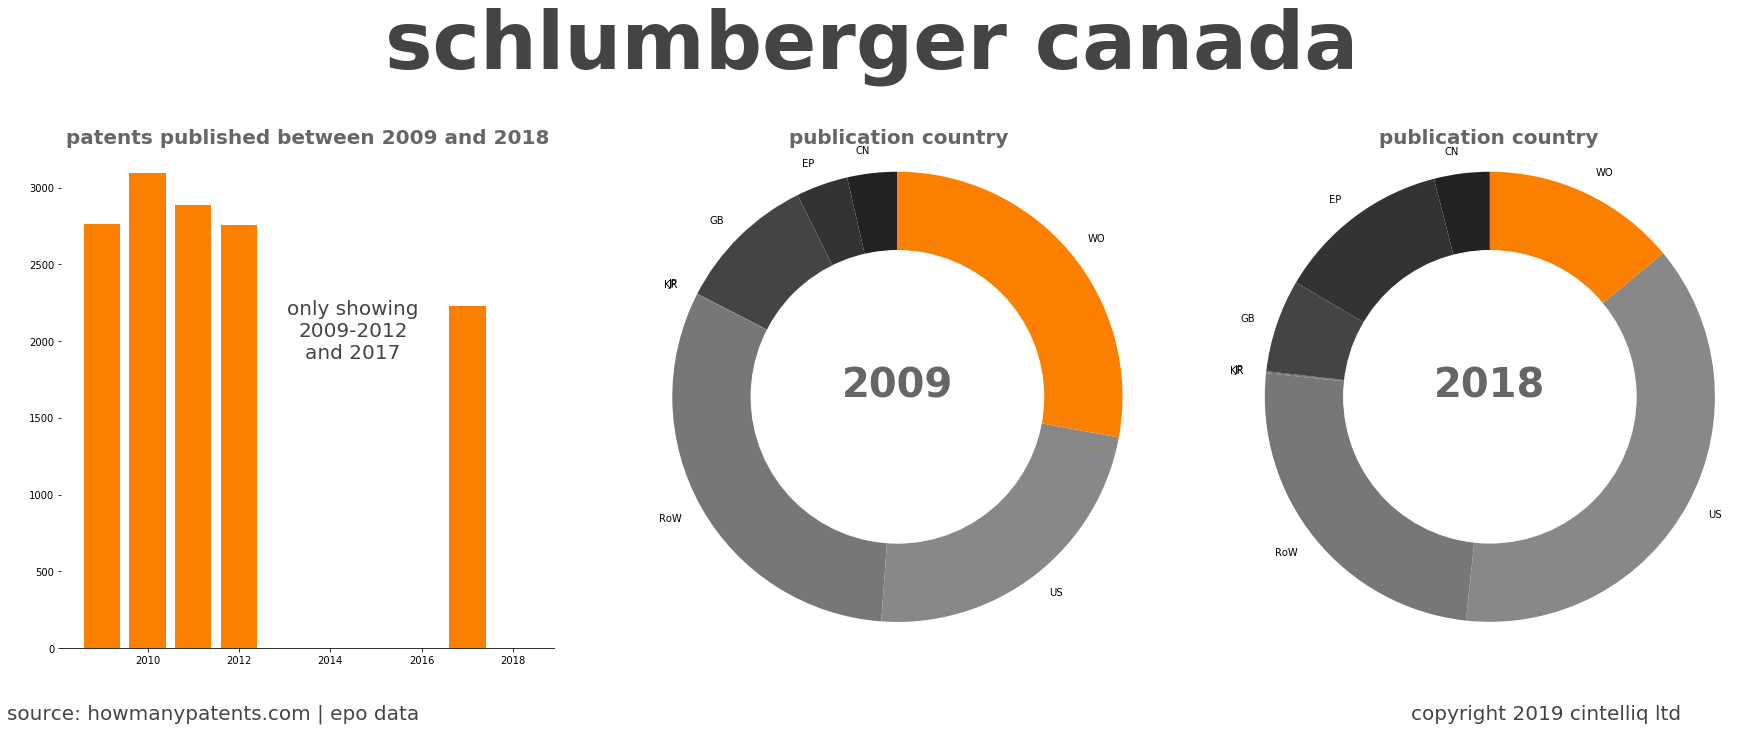 summary of patents for Schlumberger Canada